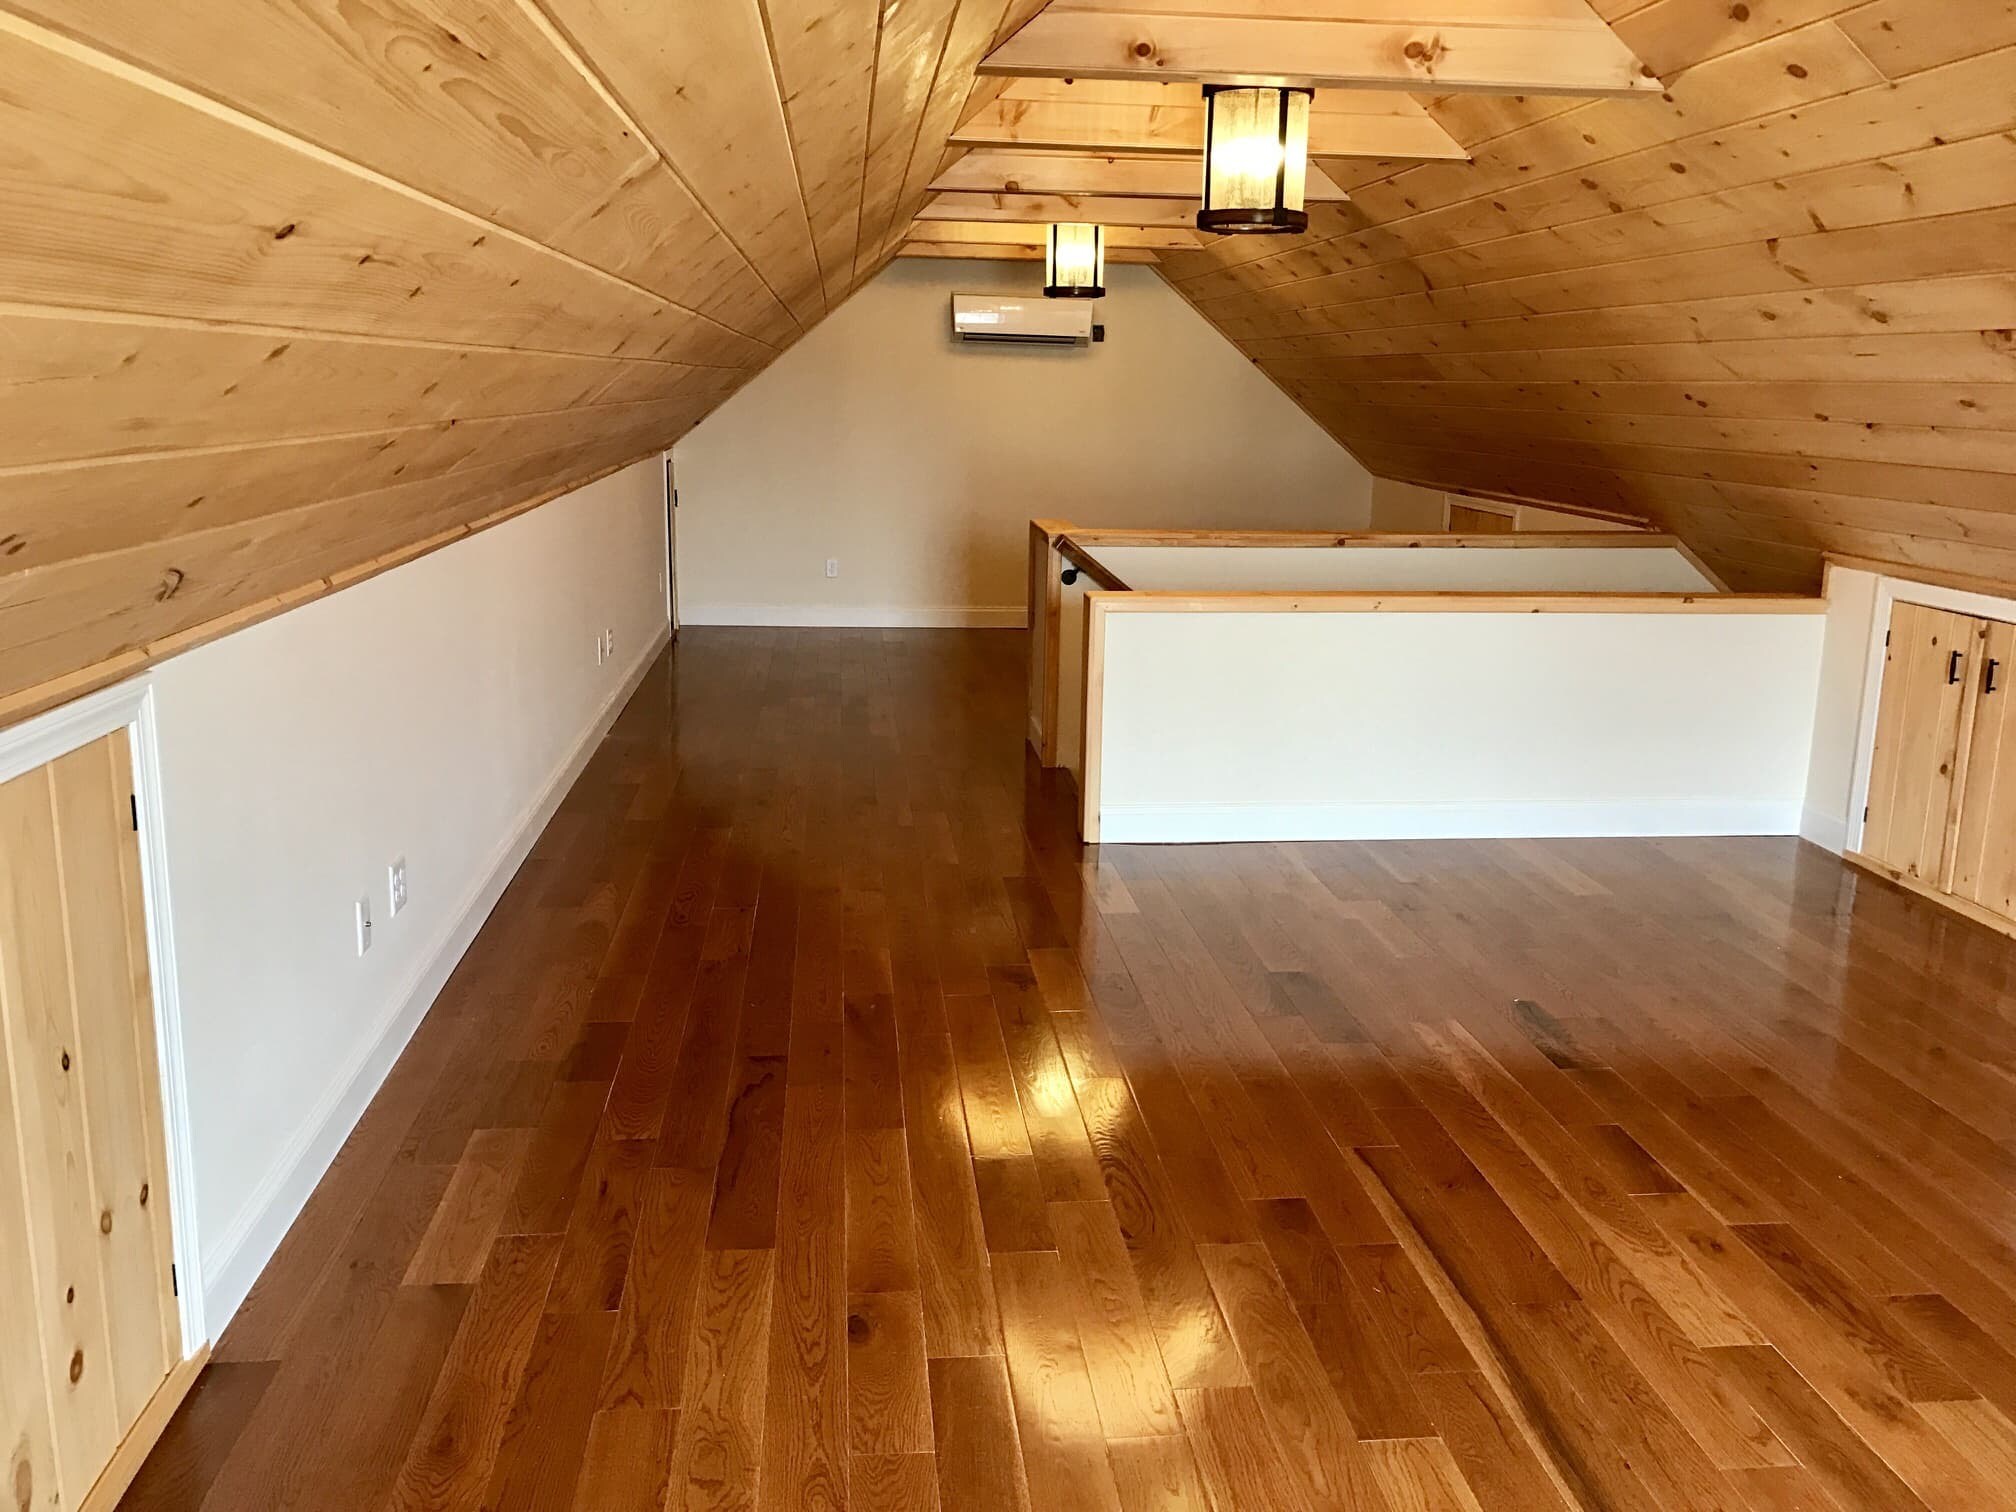 How To Put A Floor In An Attic